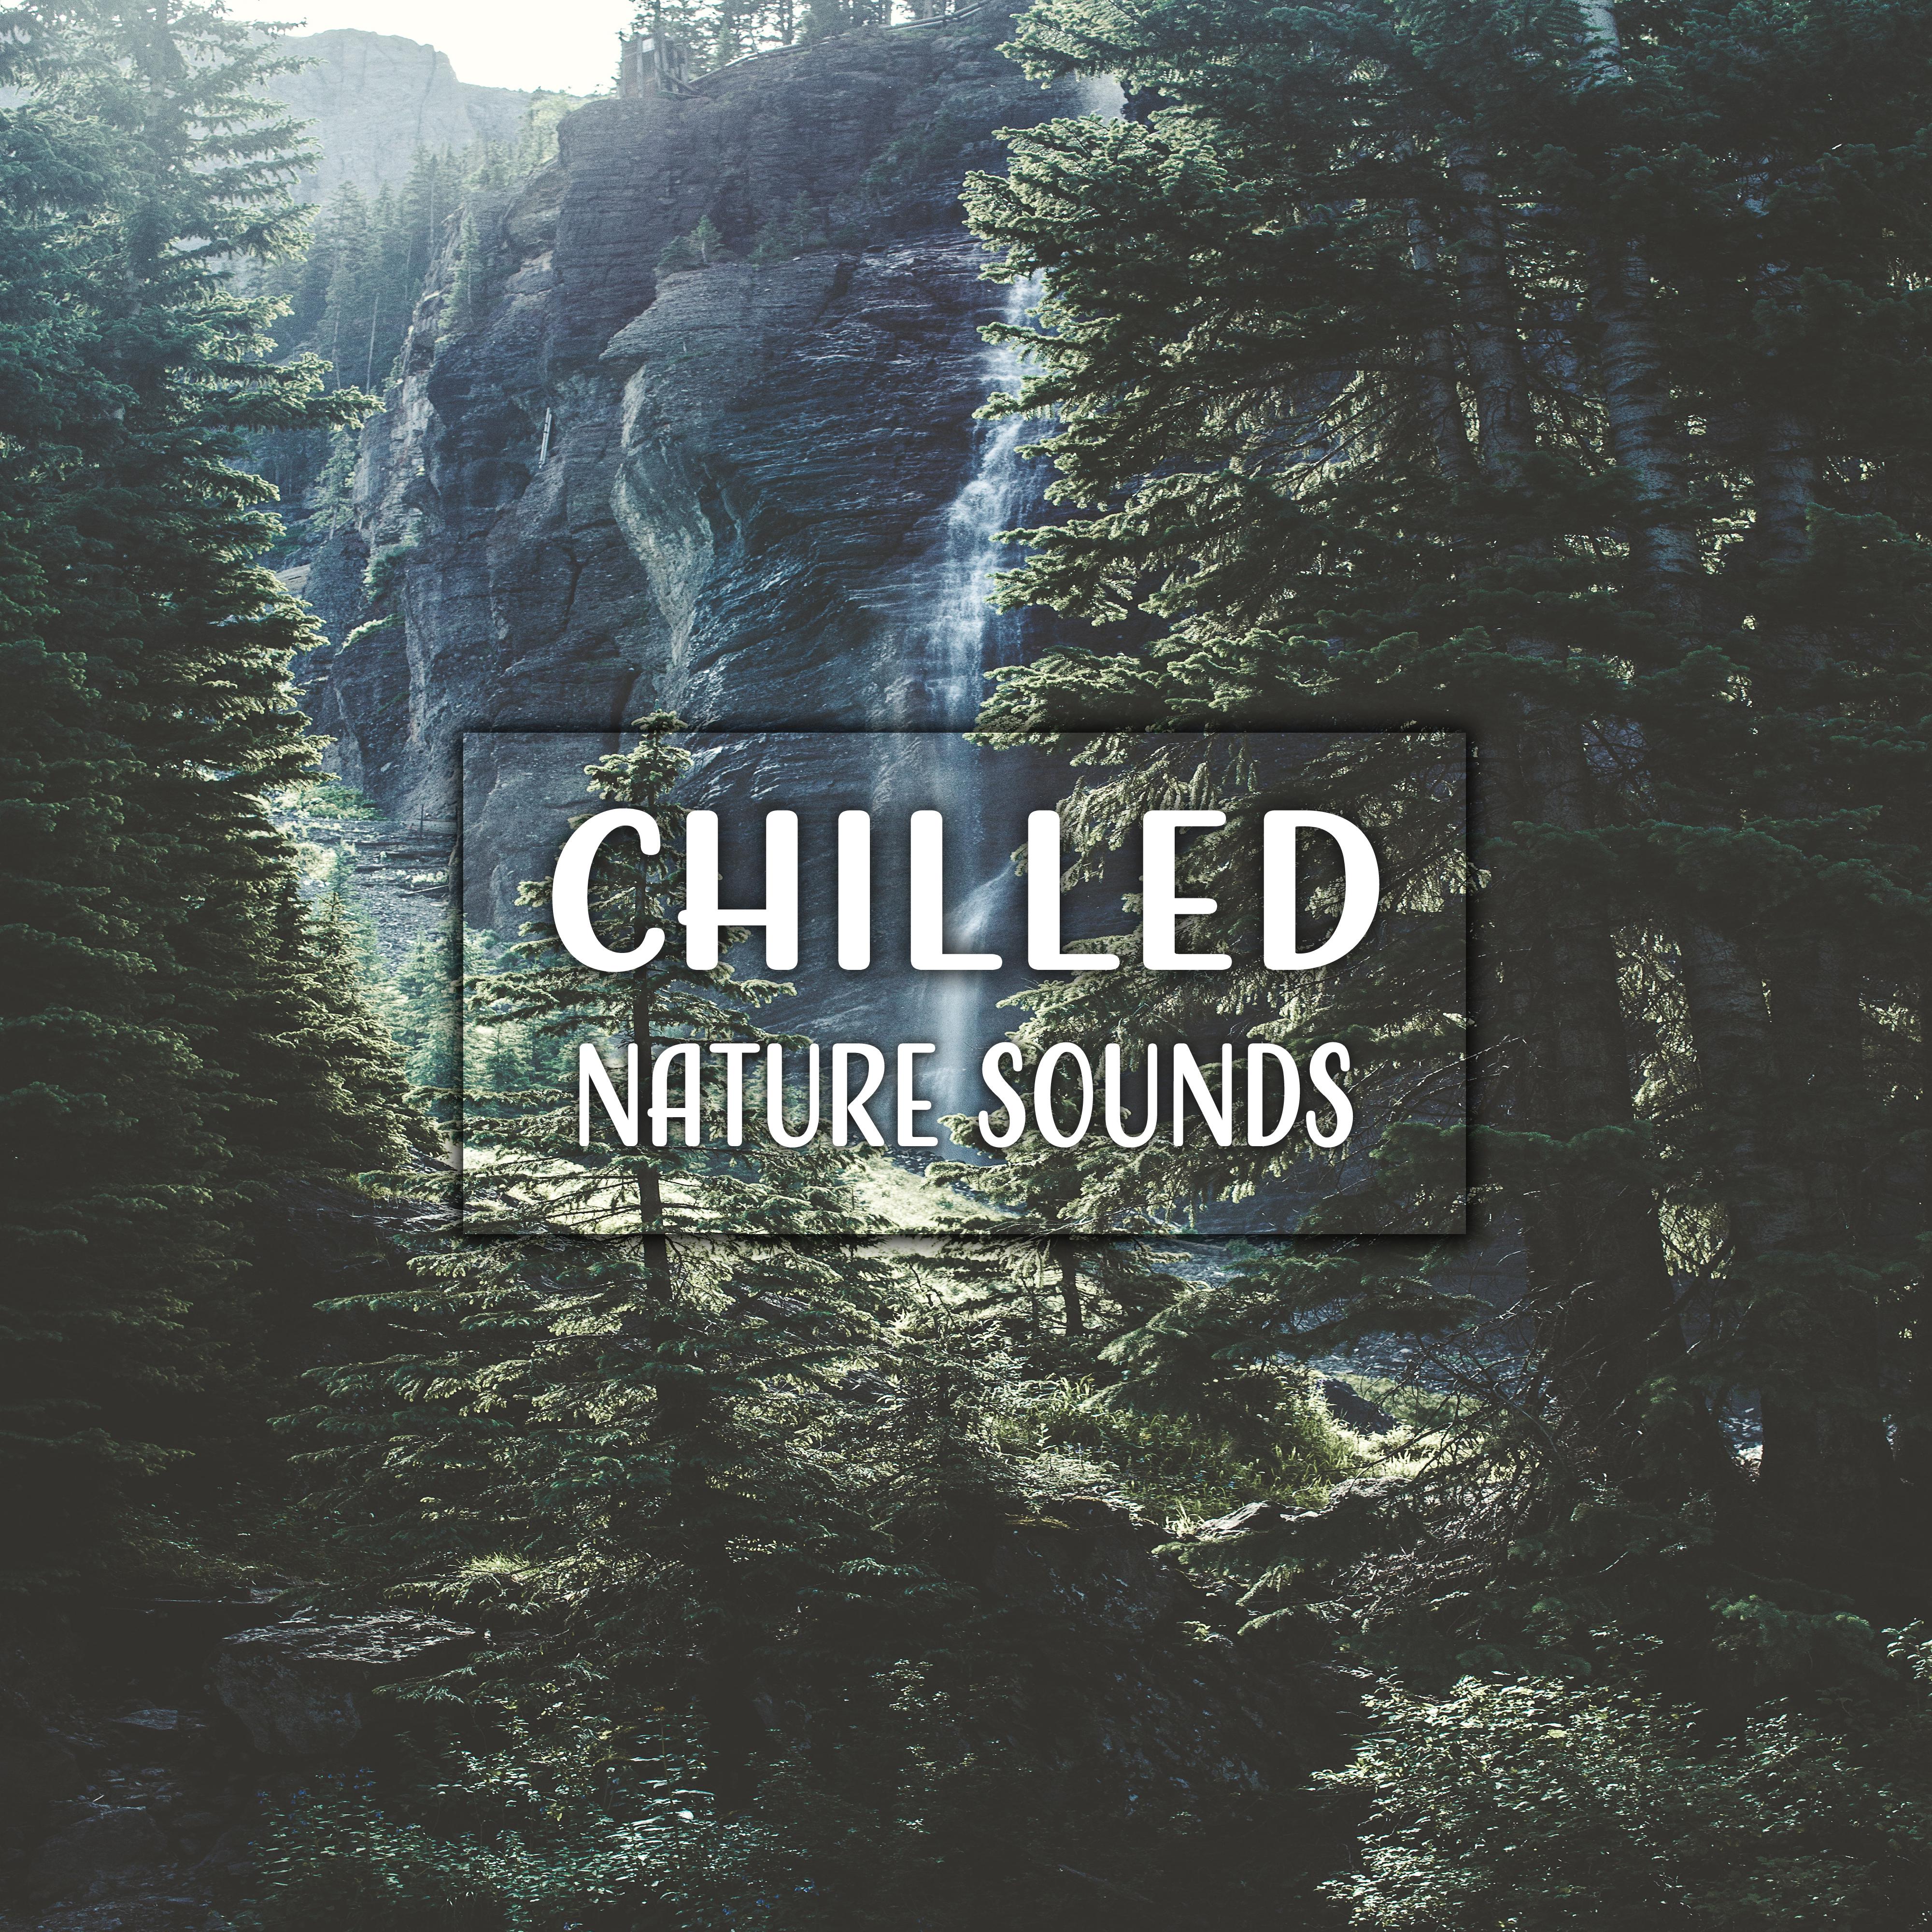 Chilled Nature Sounds – Relaxing Music, Nature Sounds, Rest, Zen, Bliss, Healing Music Therapy